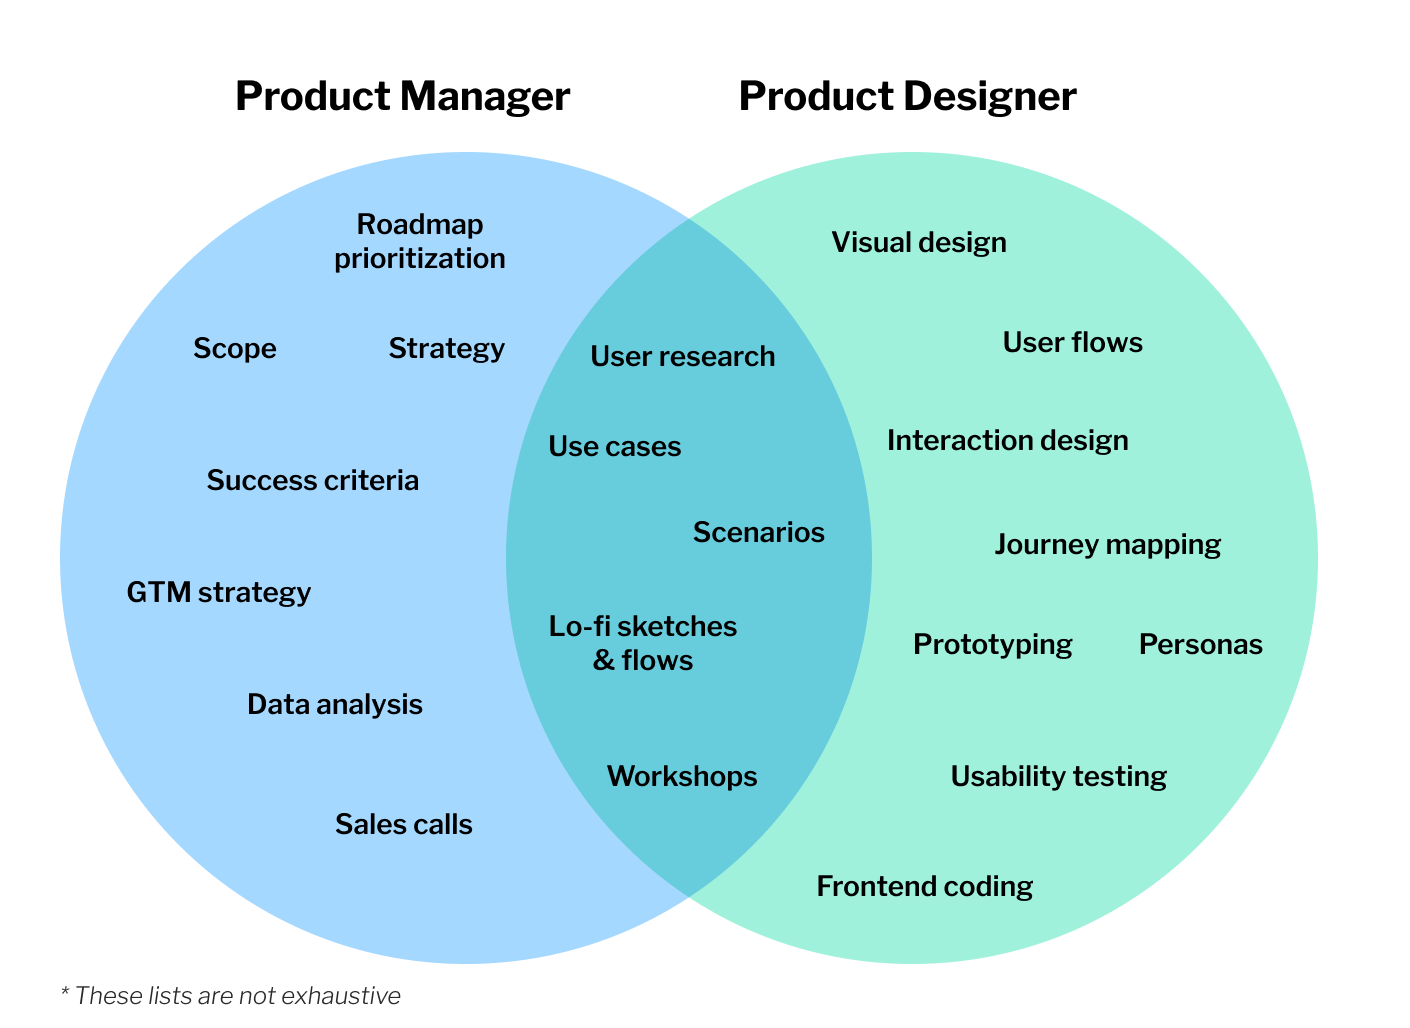 Product Manager and Product Designer: Who Does What? by Jeff Zych